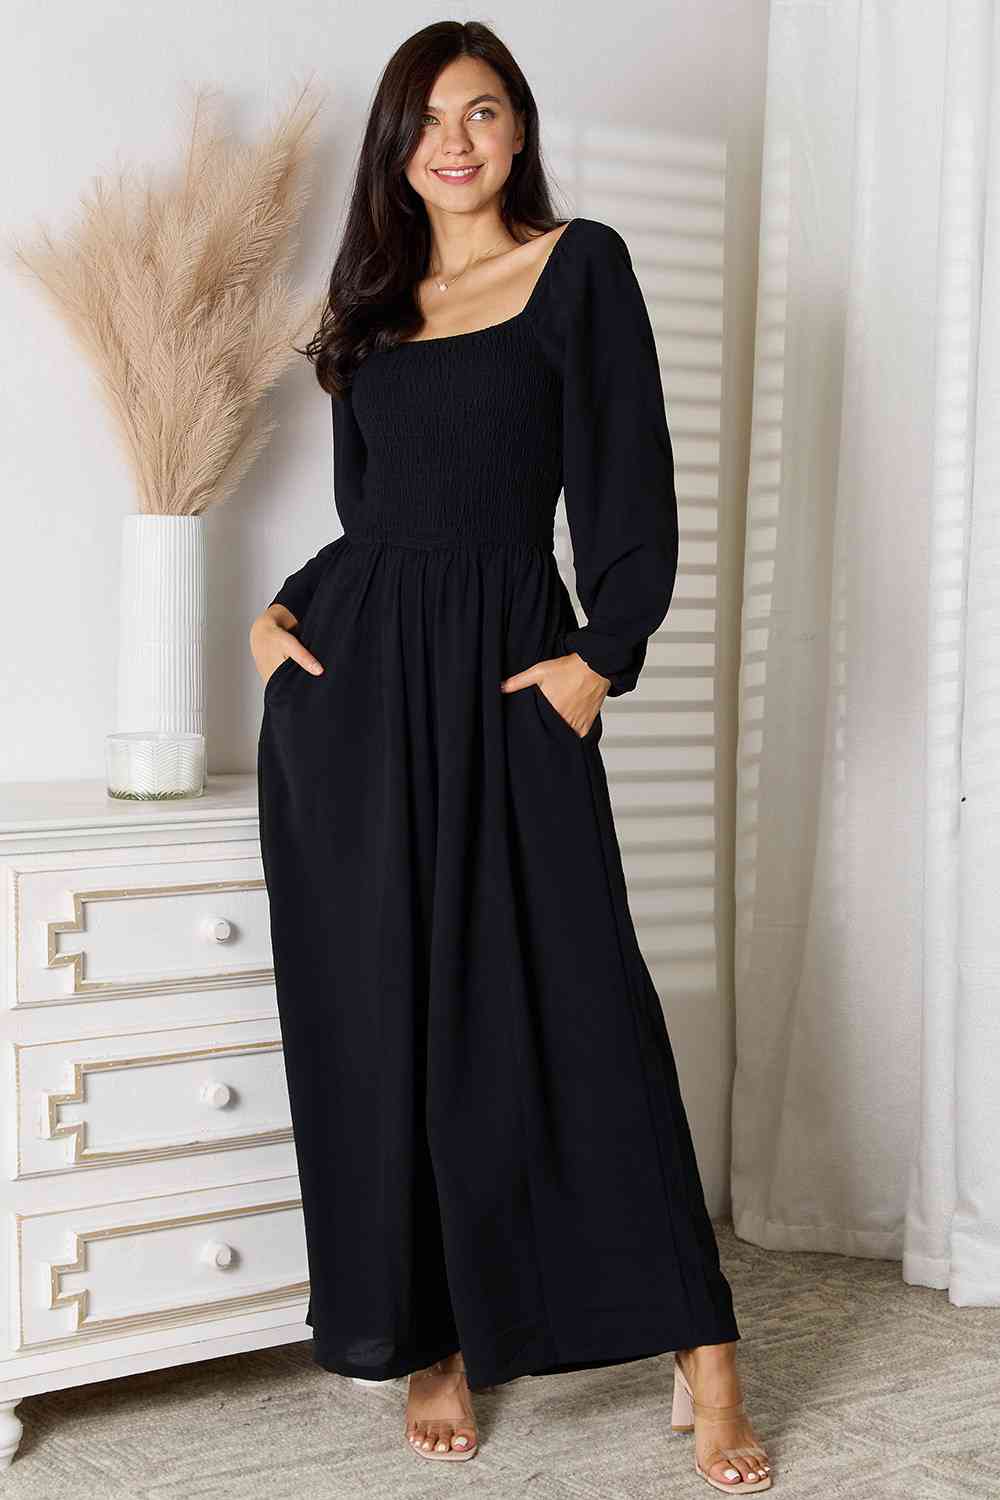 Cute Jumpsuits for Women Fall Dressy Polka Dot Formal Elegant Evening Party  Wedding Guest Sexy Rompers - Walmart.com